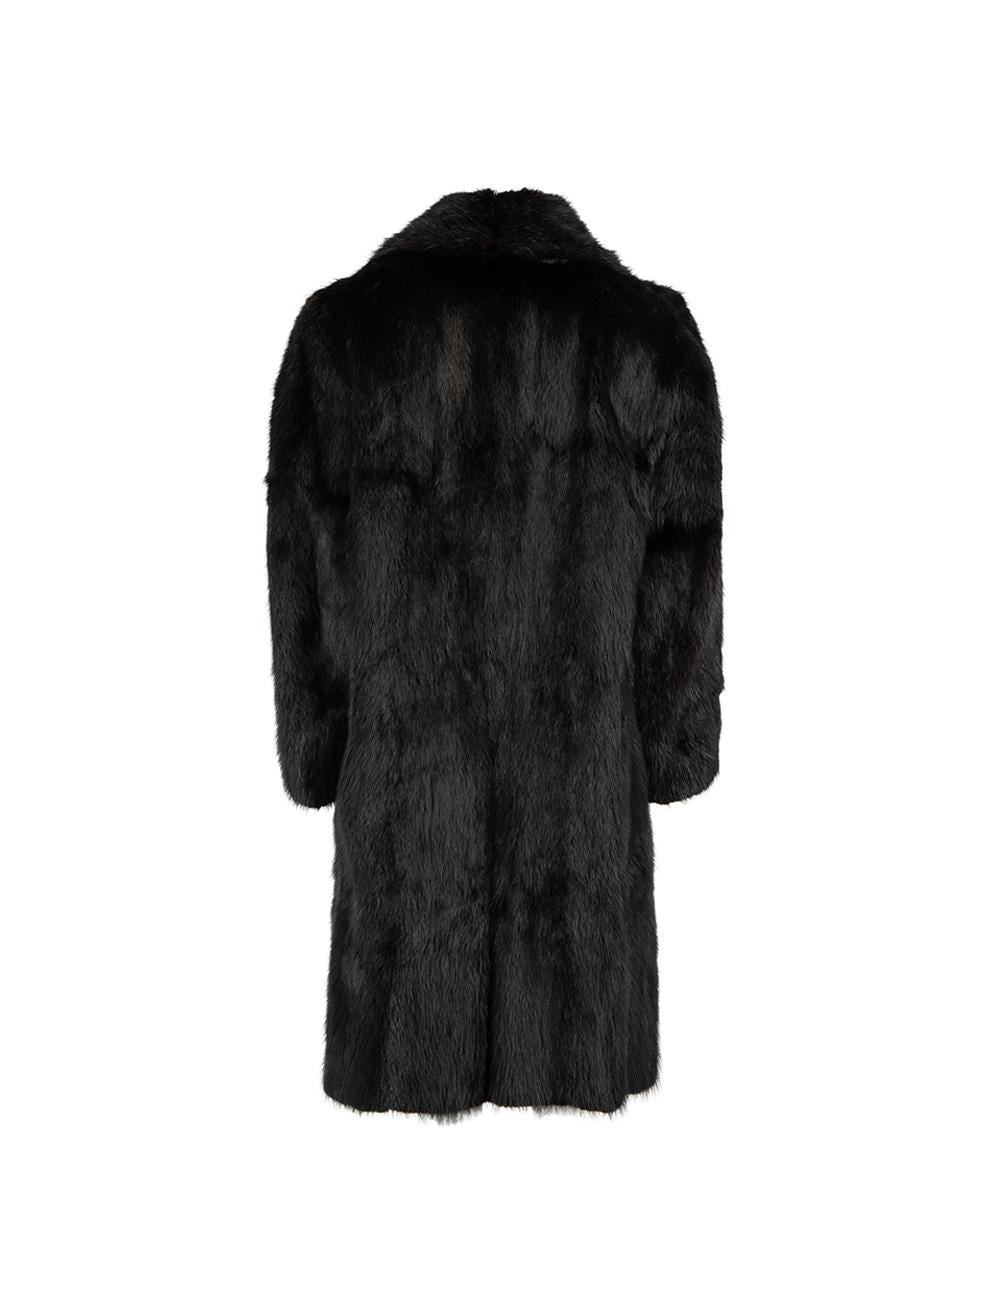 CONDITION is Very good. Hardly any visible wear to coat is evident. The second button thread is loose on this used Frank Gooney designer resale item. Details Black Fur Long line coat Single breasted Front side pockets Internal slip pocket Back vent